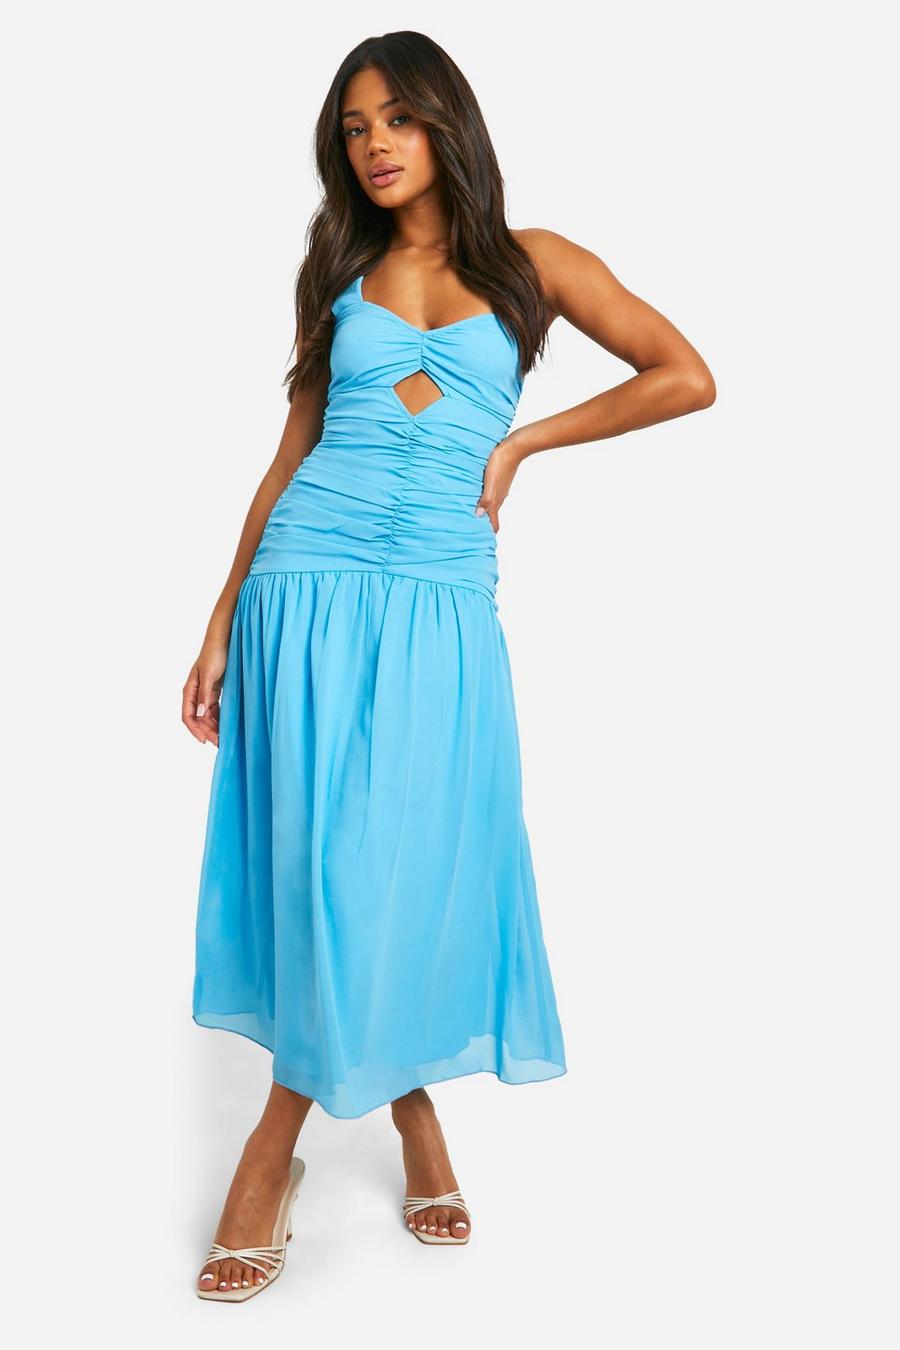 Turquoise Chiffon Ruched One Shoulder Midaxi Dress